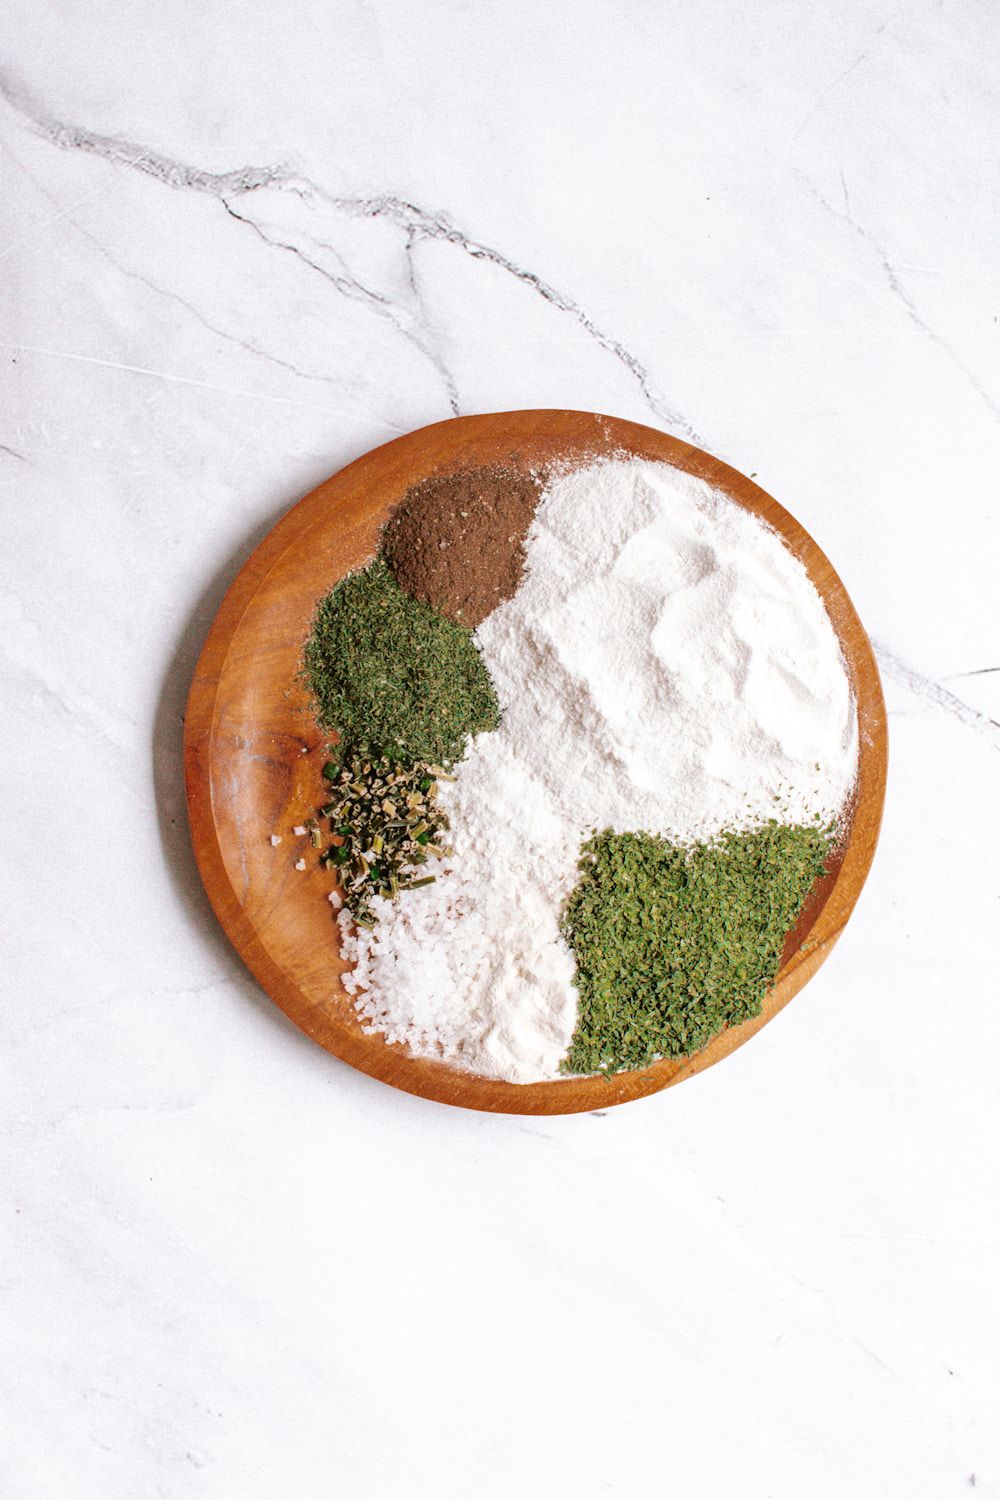 Ingredients for ranch seasoning with buttermilk powder, dried herbs, onion powder, garlic powder, and pepper on a wooden plate.